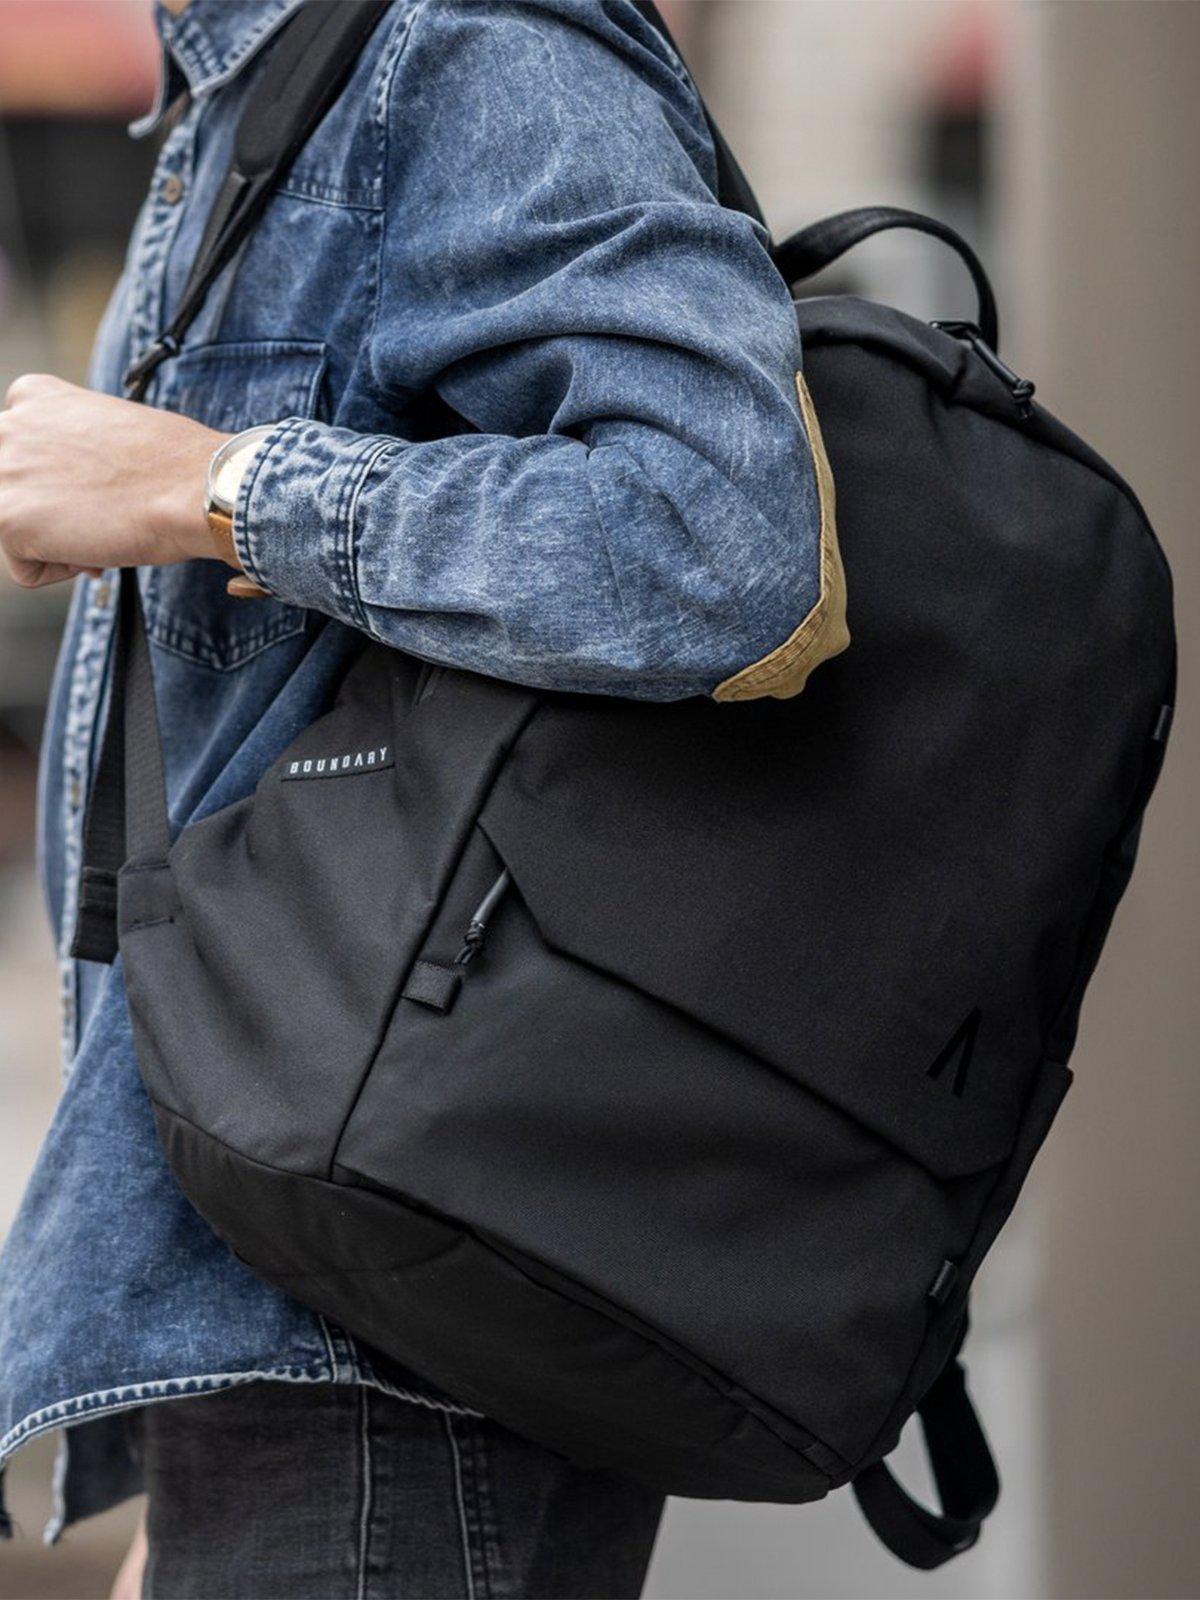 Boundary Supply Rennen Recycled Daypack Black